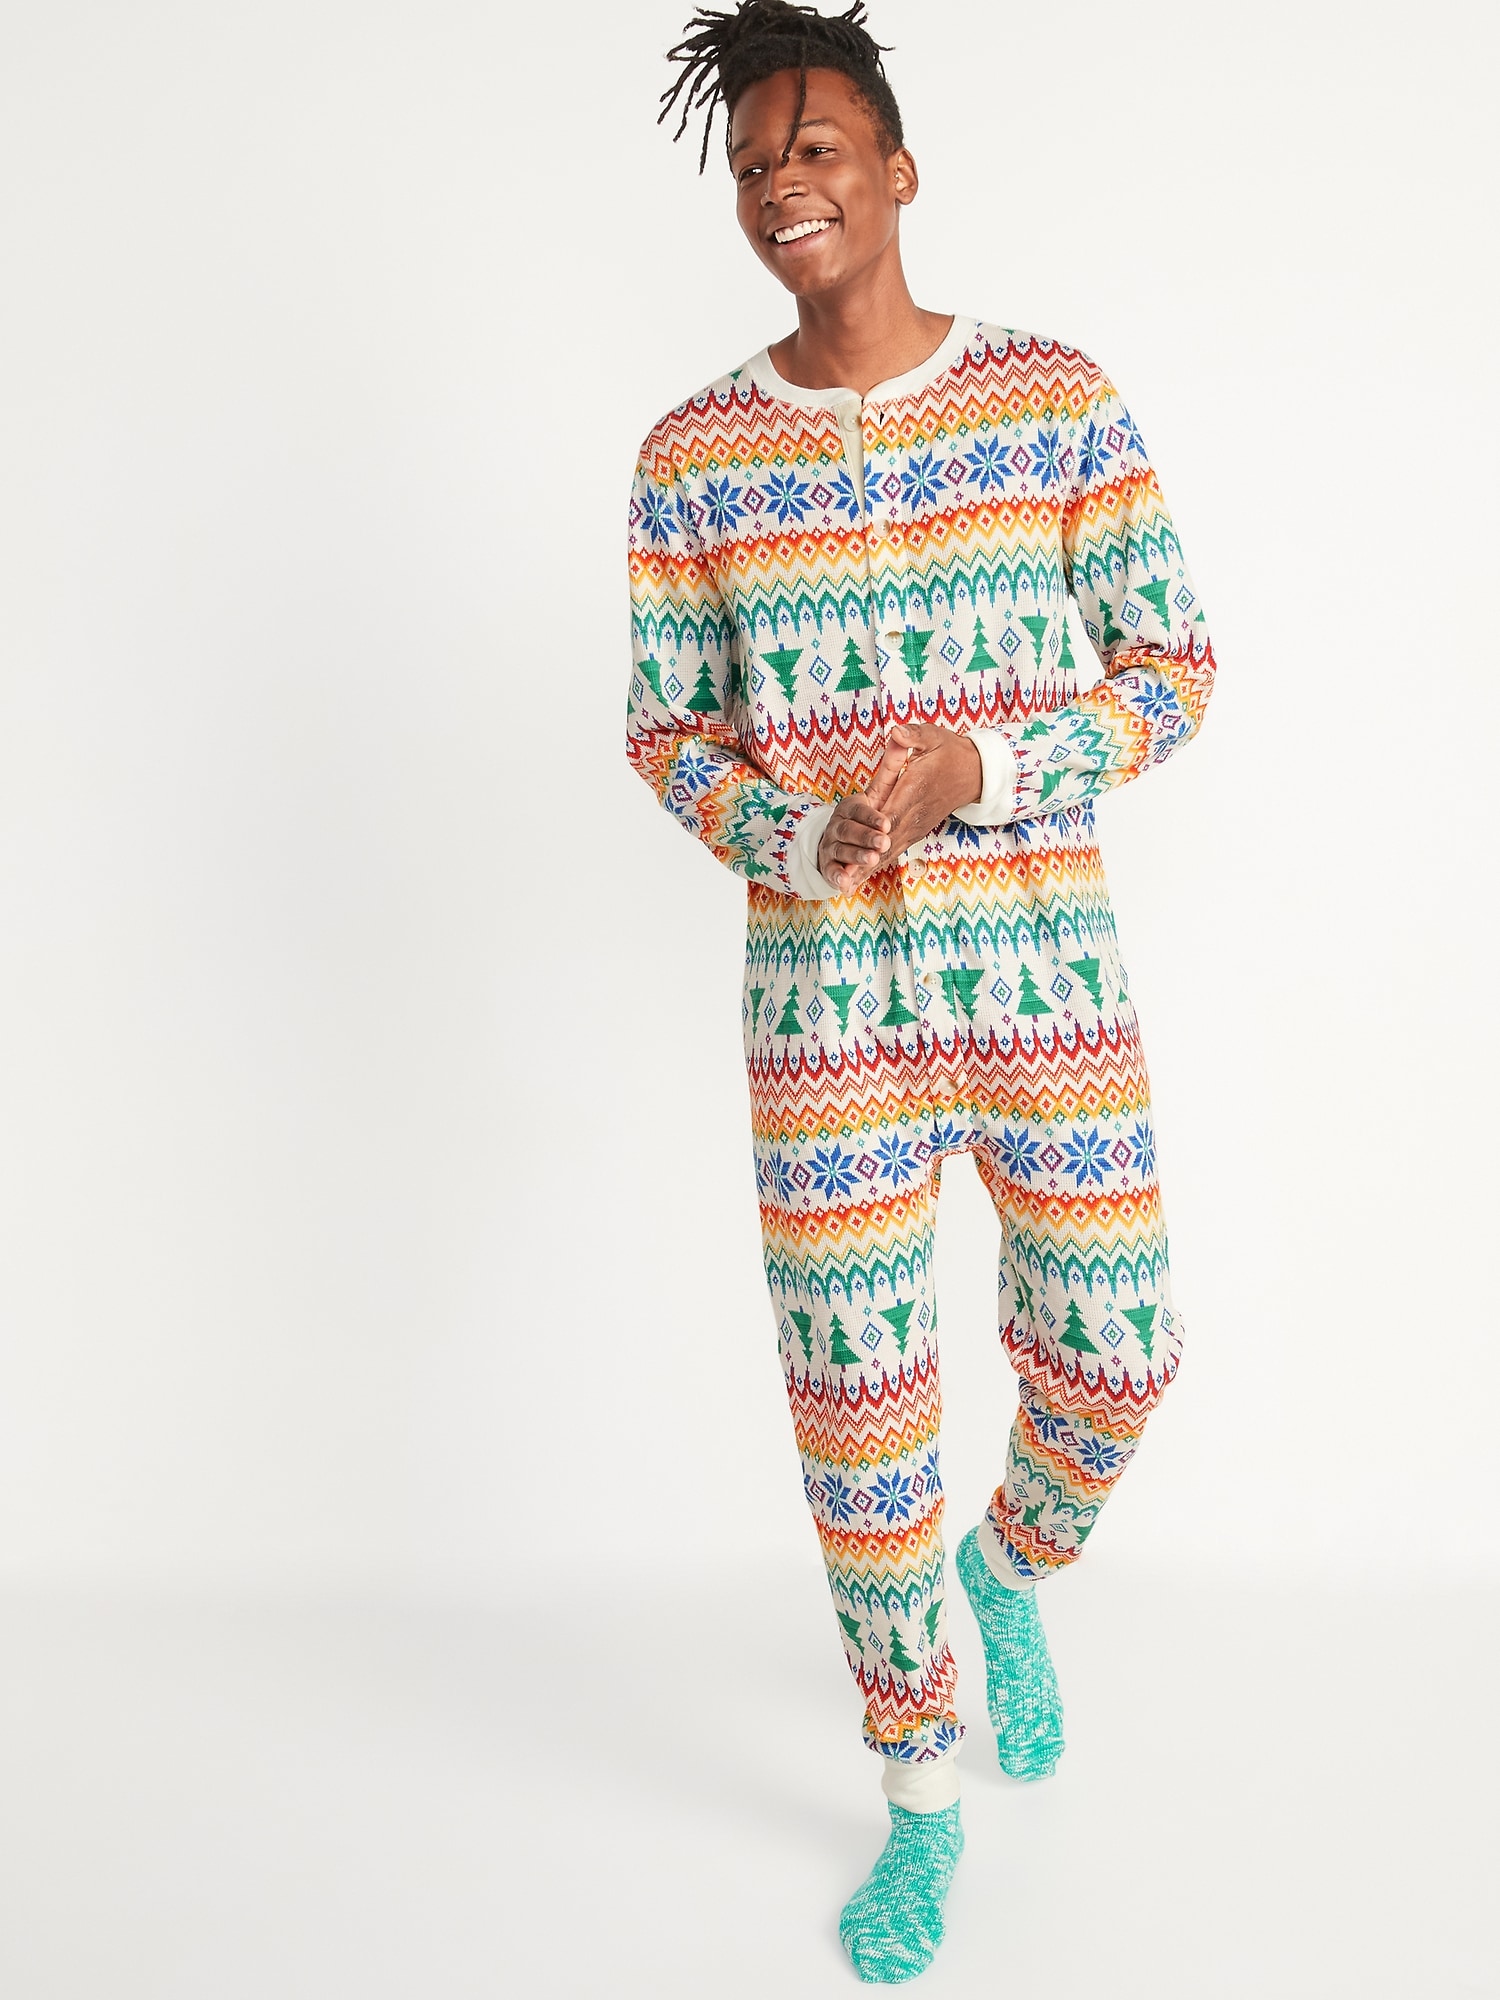 Matching Printed Thermal Pajama One-Piece for Men | Old Navy